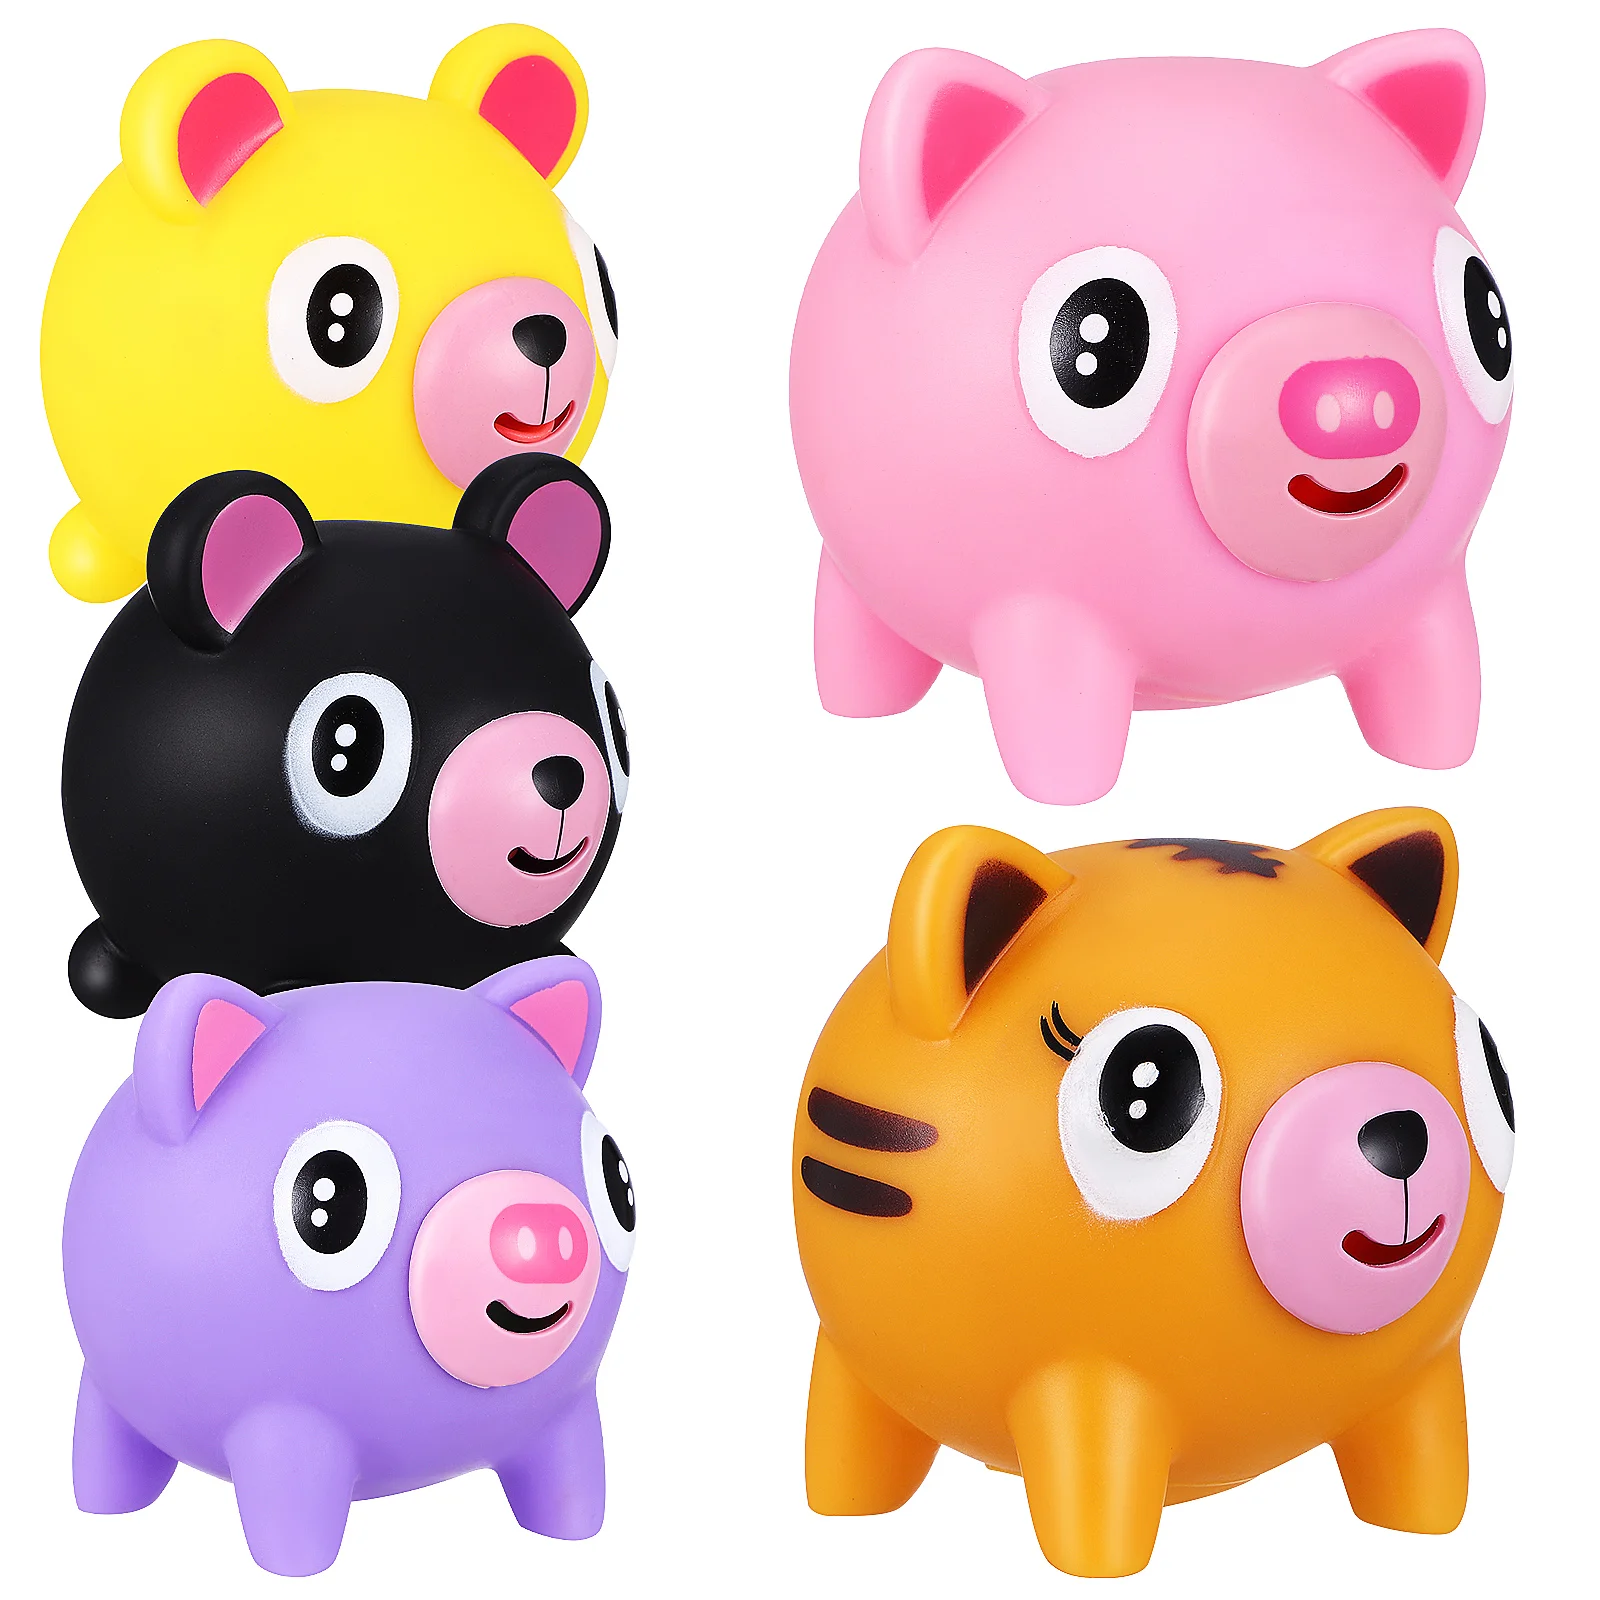 

Piggy Kids Latex Animal Squeeze Tongue Stick Out Slow Rising Piggy Stress Screaming Toy Decompression Relief Children Kids